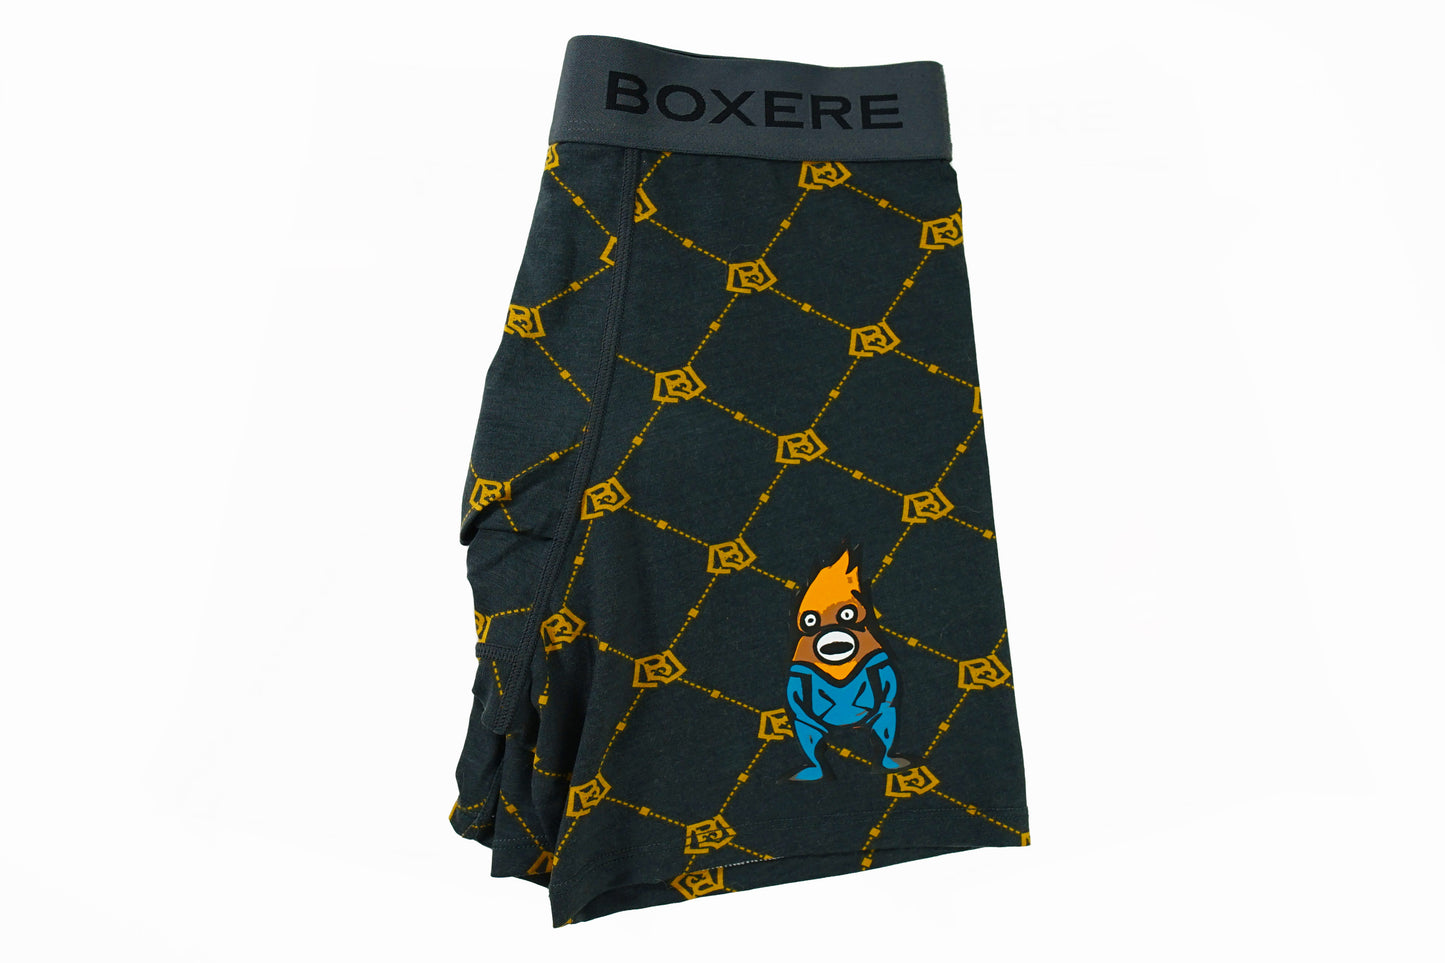 Boxere Limited Edition #0